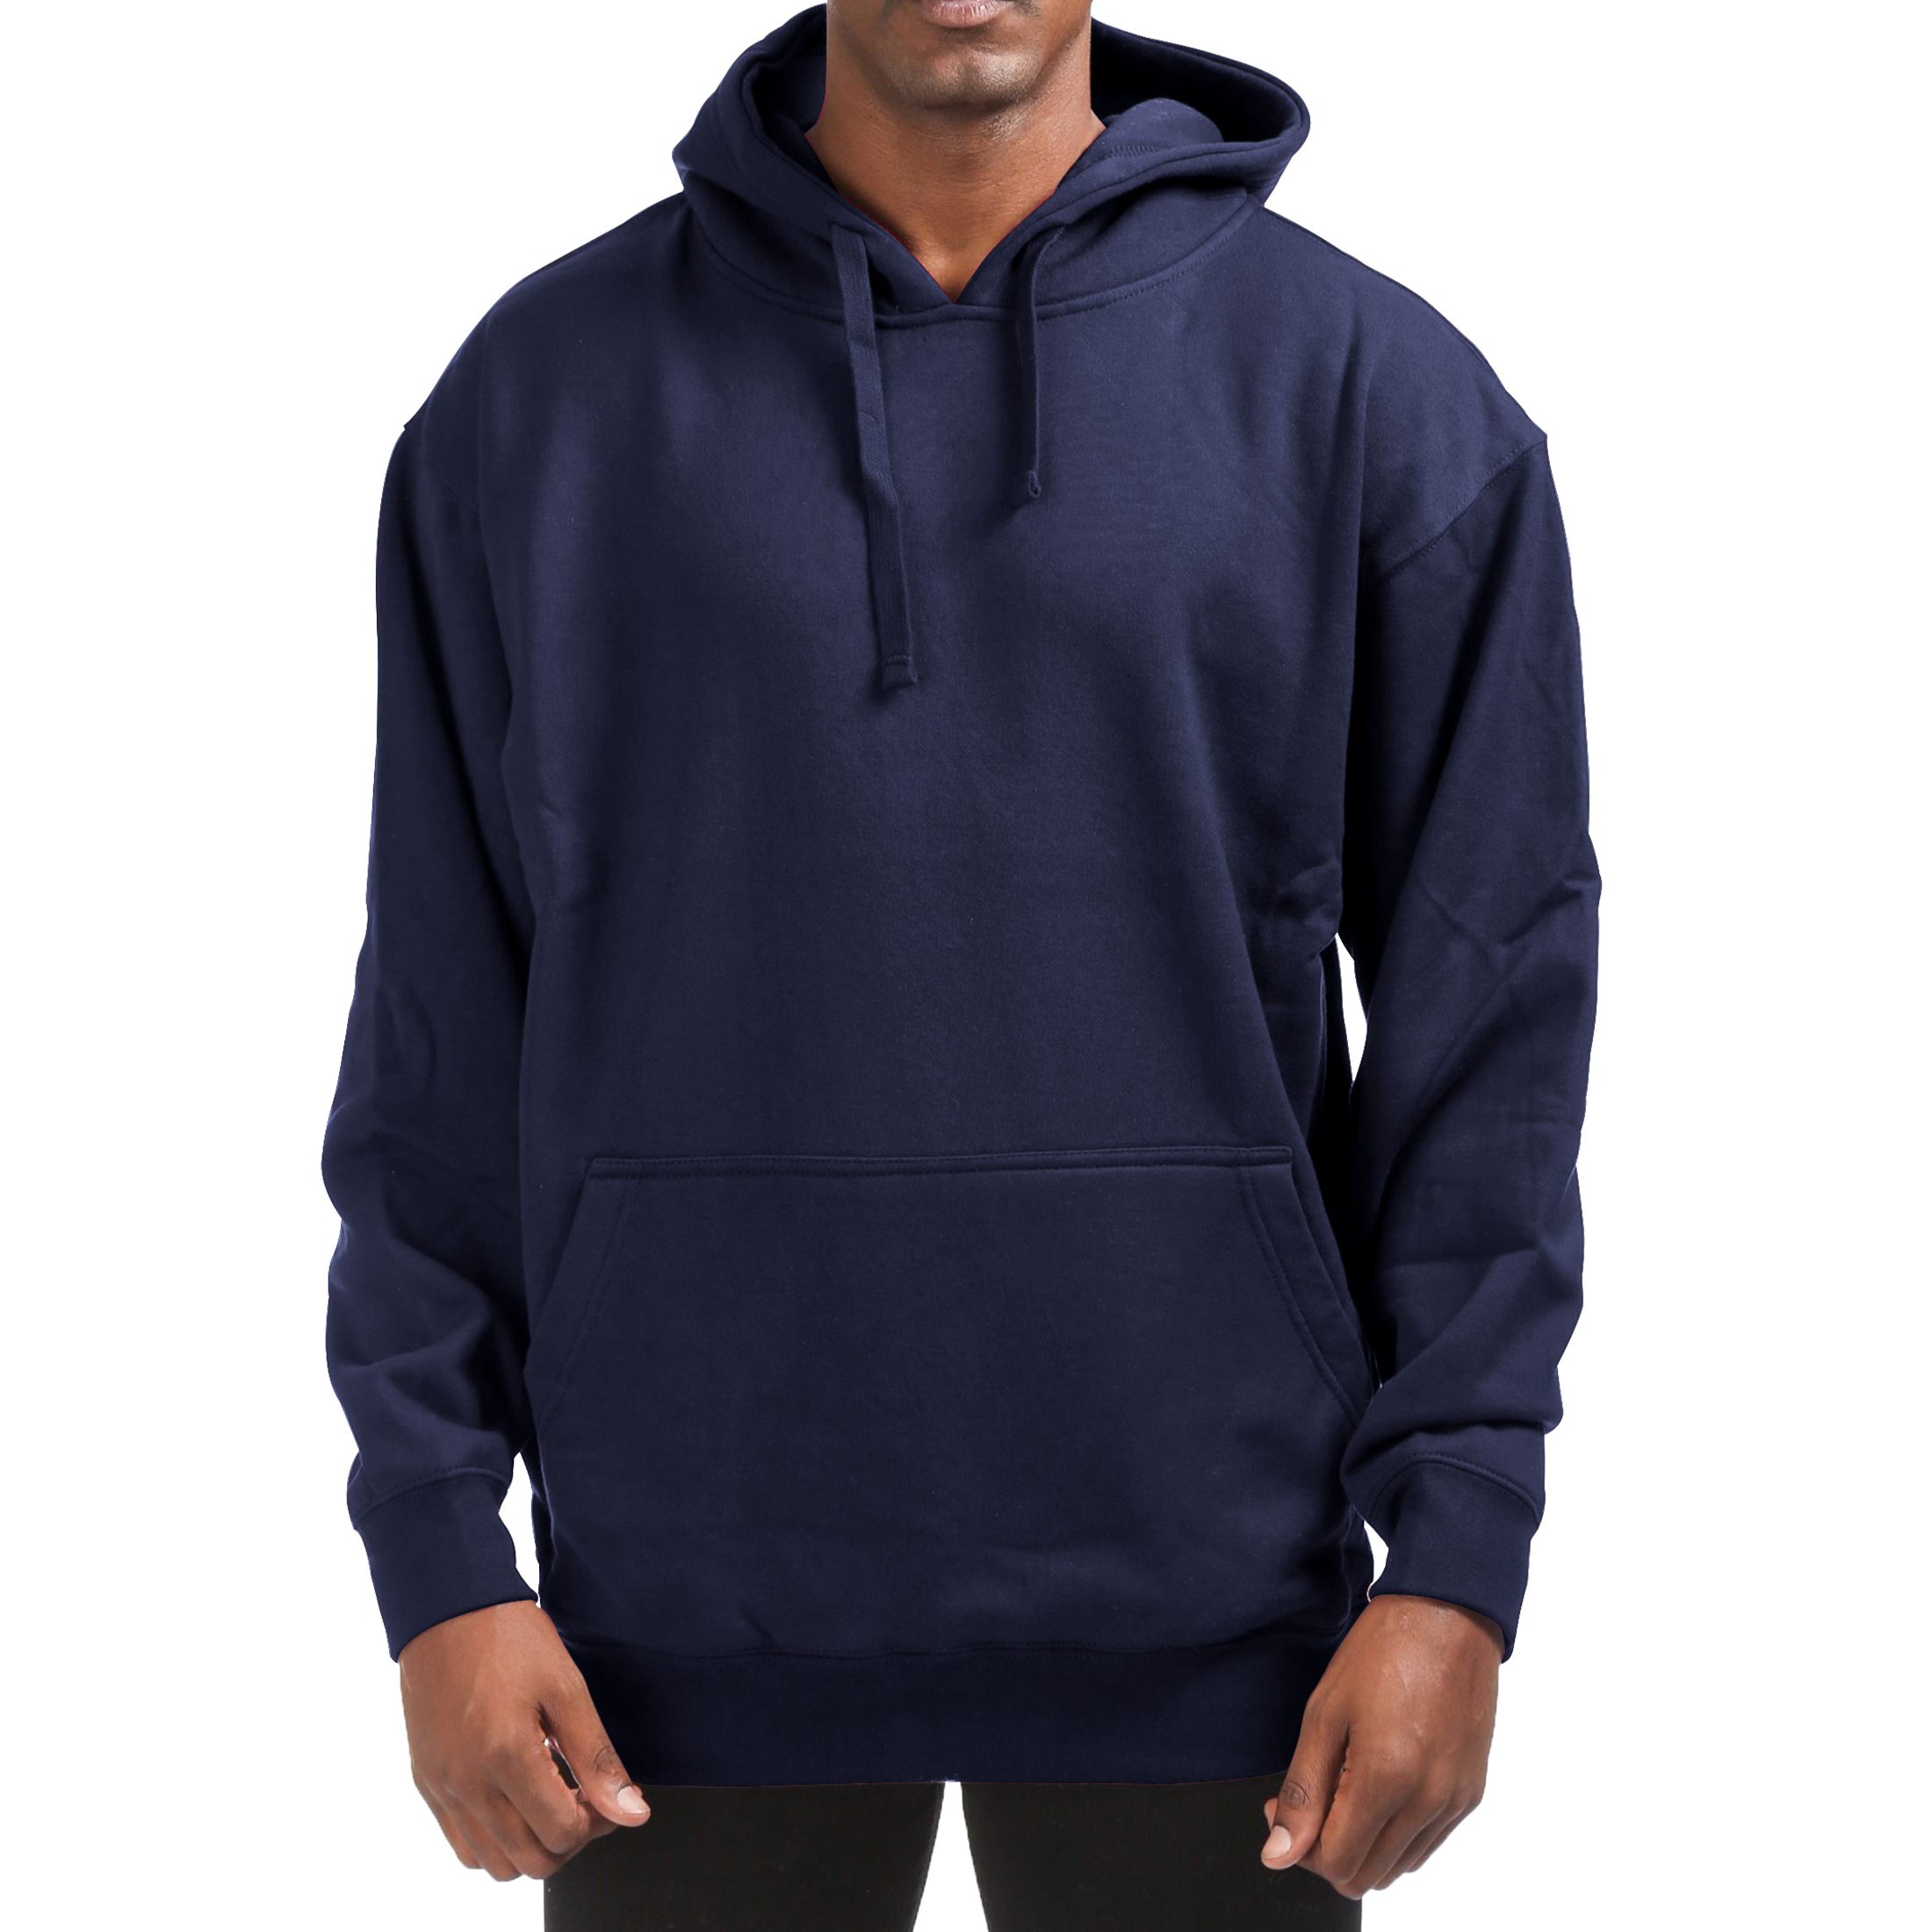 Men's Cotton-Blend Fleece Pullover Hoodie With Pocket (Big & Tall Sizes Available) - Navy, Large